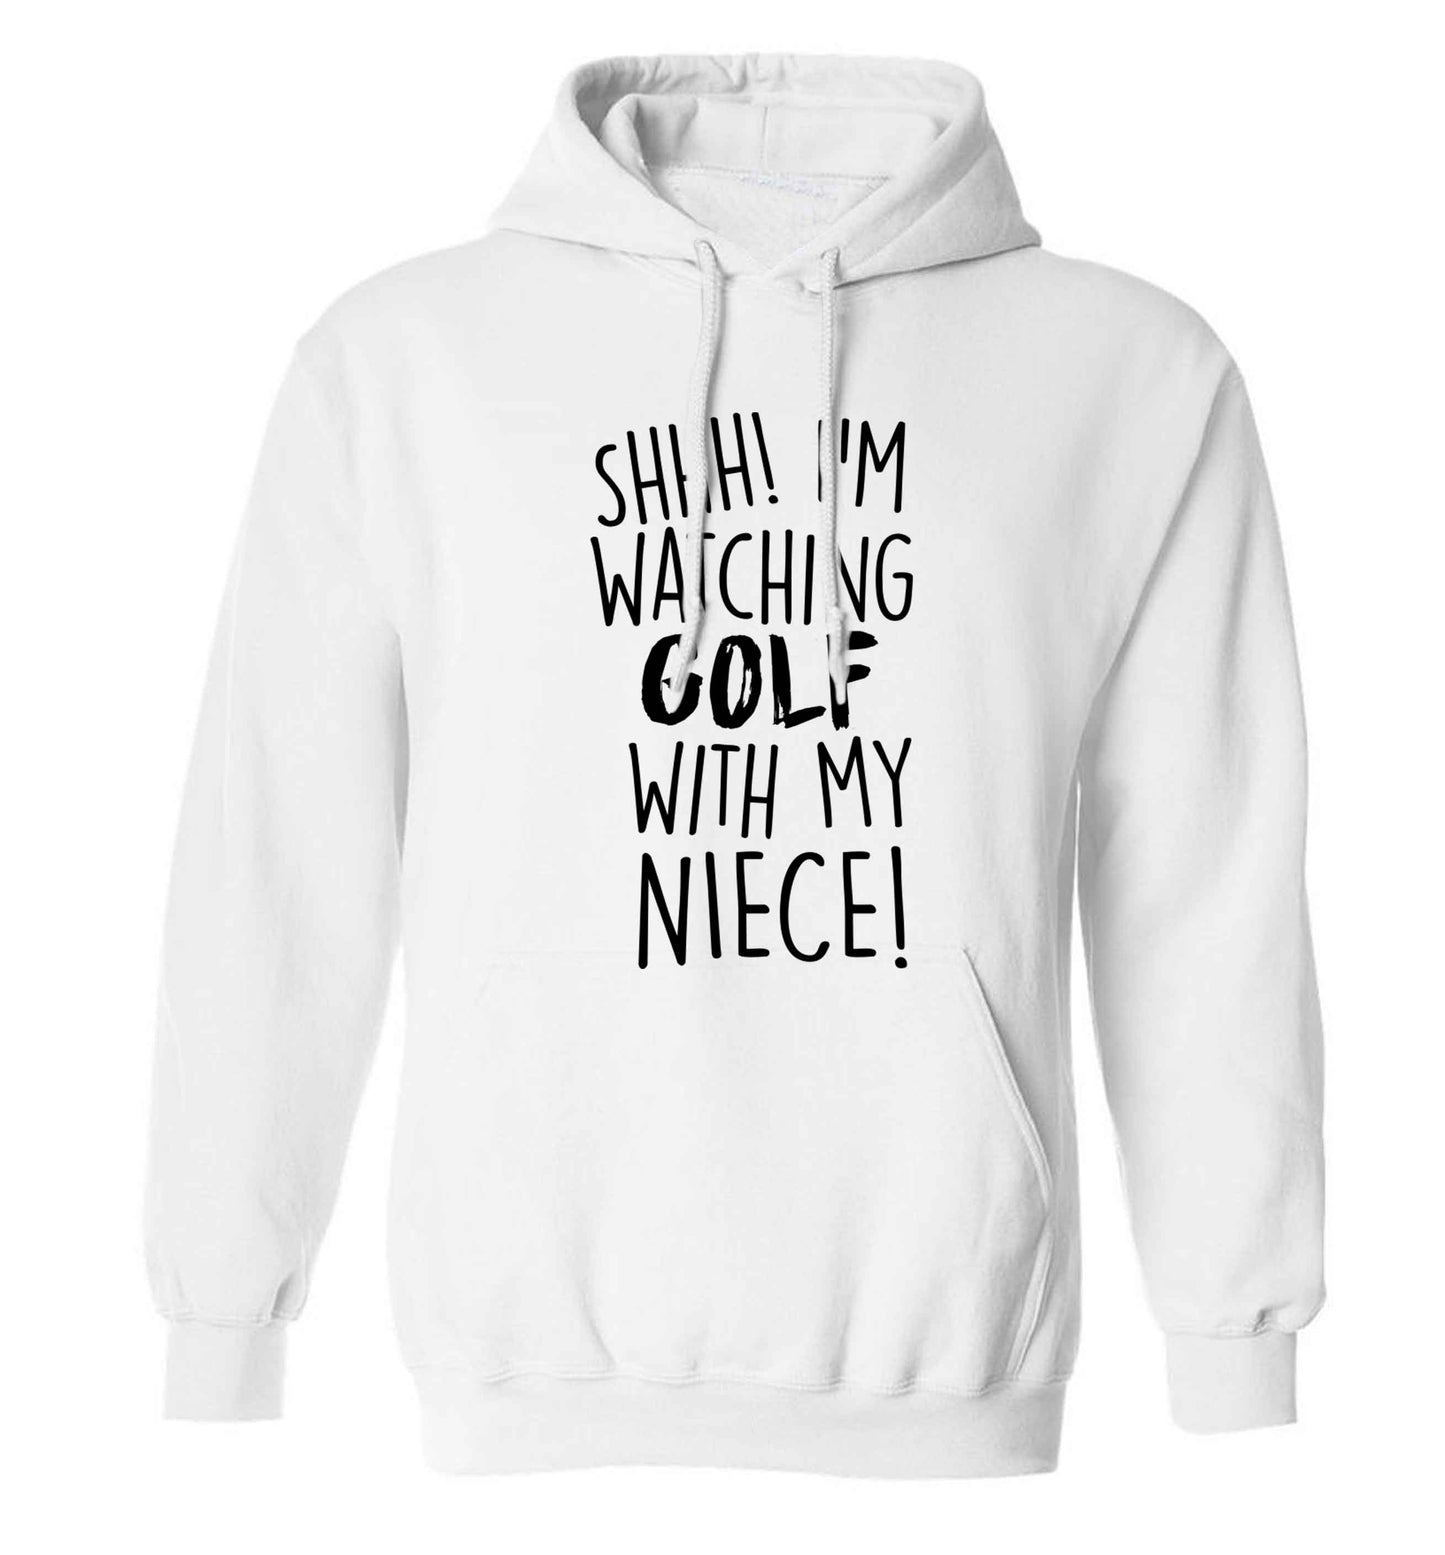 Shh I'm watching golf with my niece adults unisex white hoodie 2XL